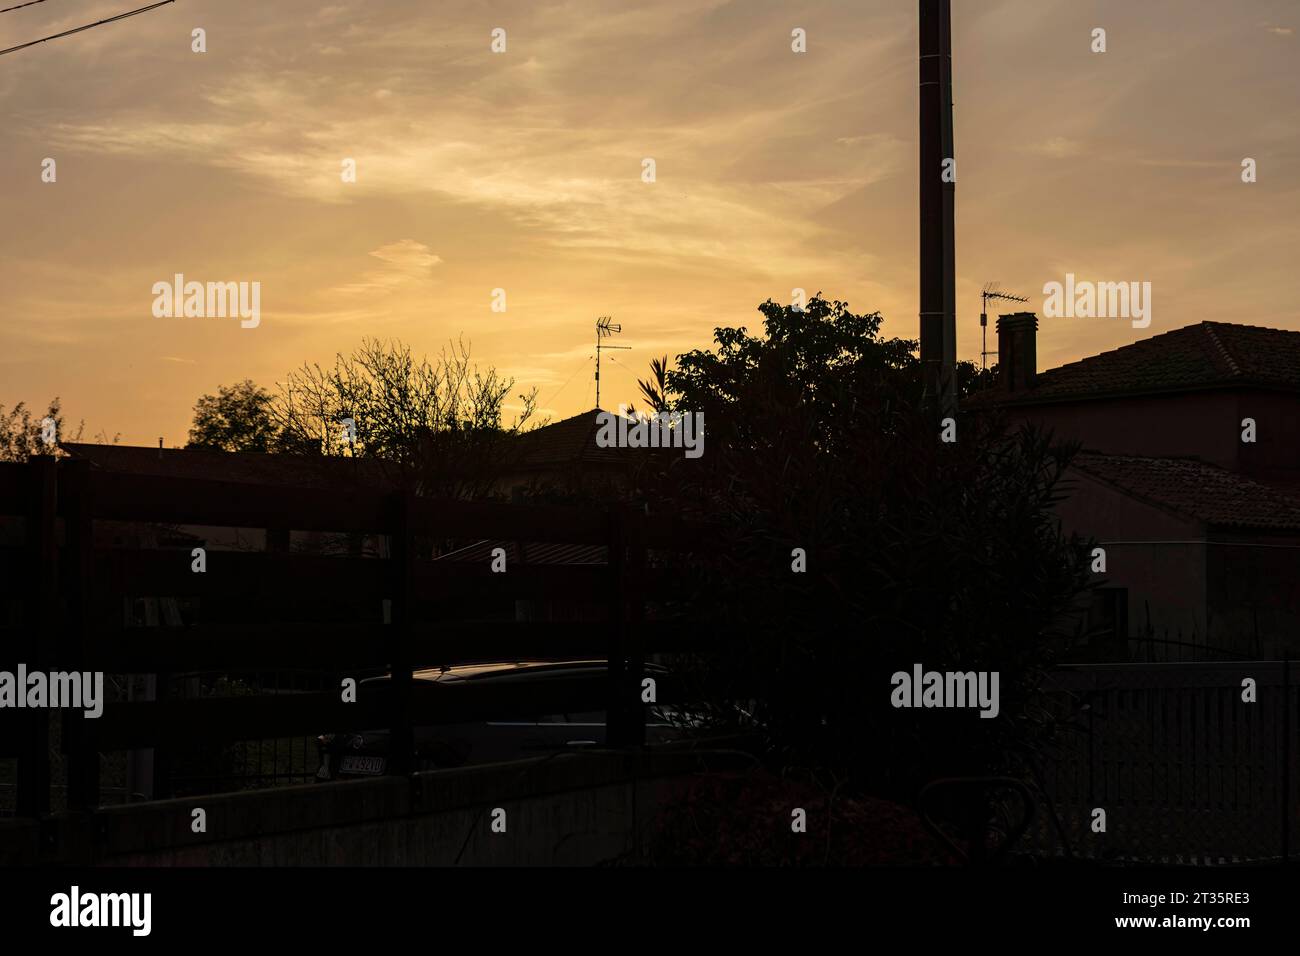 Golden hues of sunset filter through the silhouette of urban houses, casting a serene ambiance. Sunset Amidst City Homes Copyright: xfilippoxcarlotx 1373 Credit: Imago/Alamy Live News Stock Photo